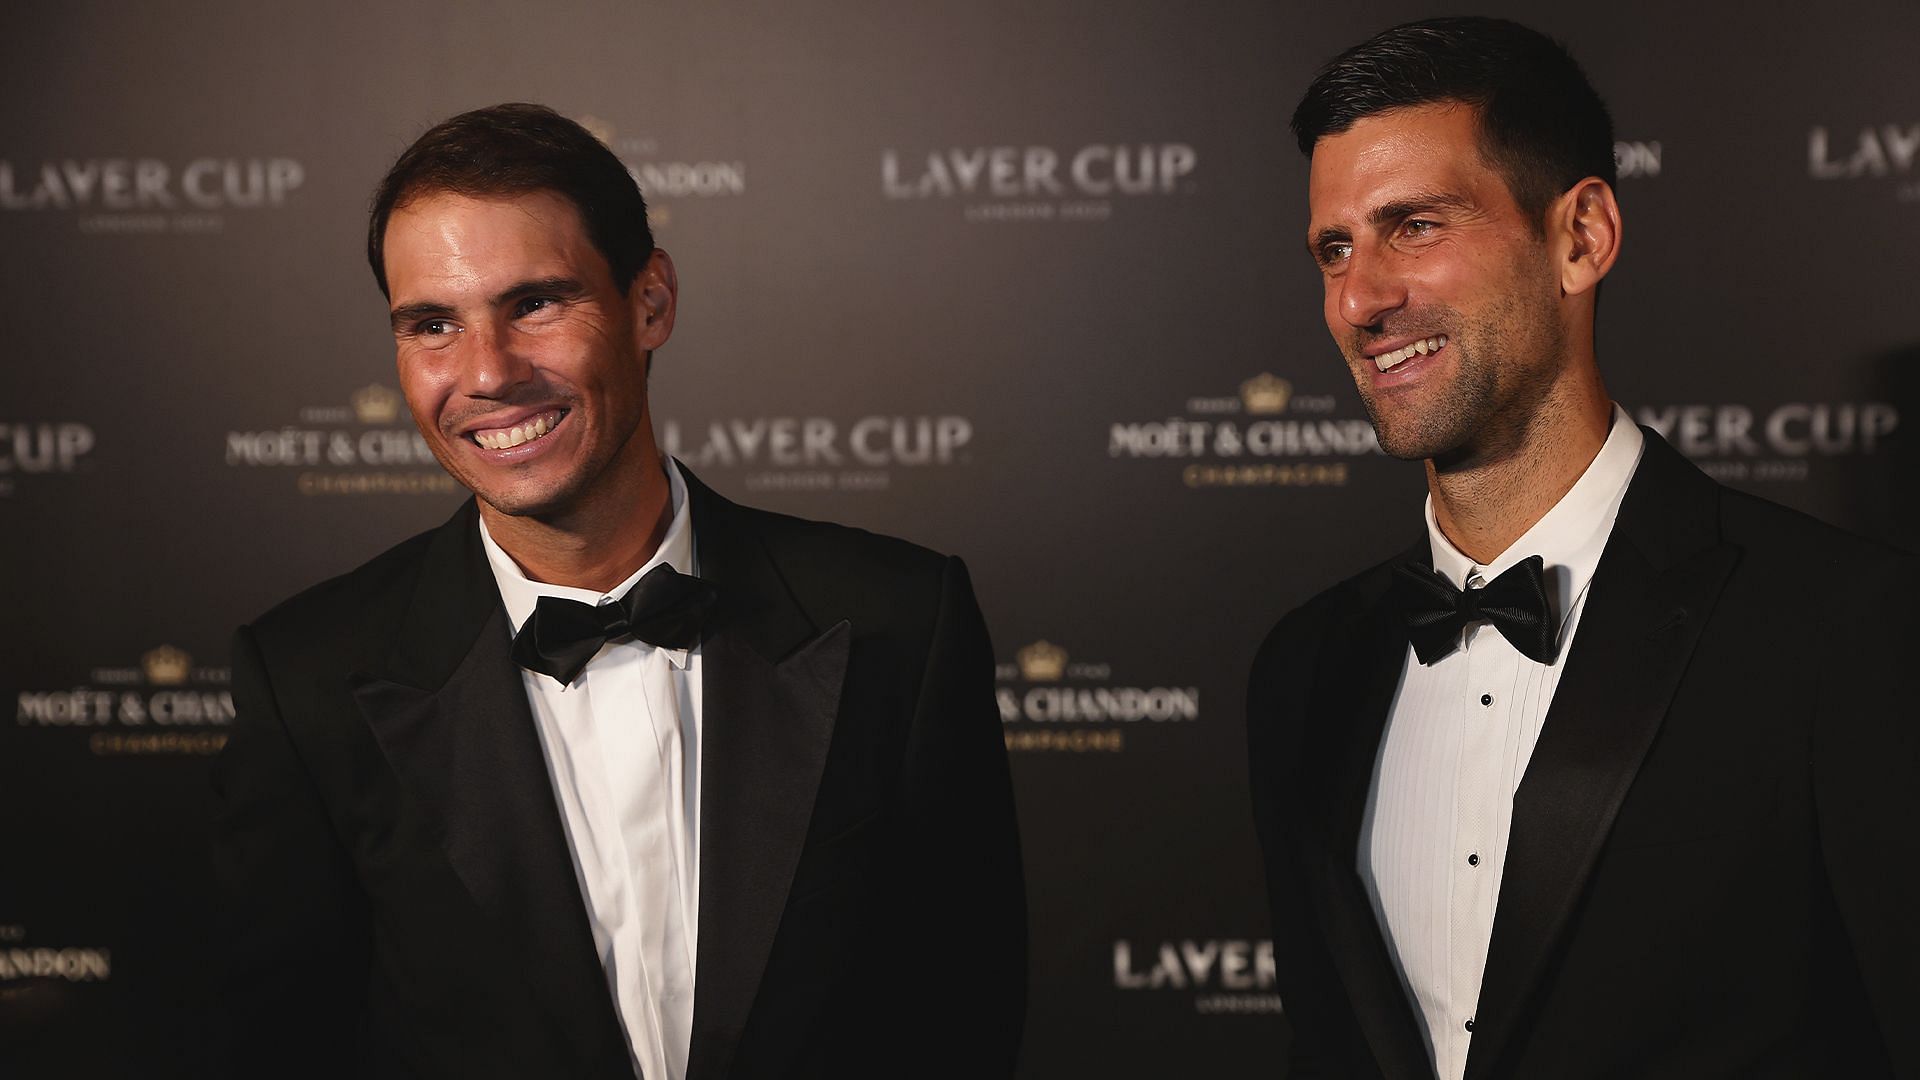 Rafael Nadal and Novak Djokovic are set to compete at the 2022 ATP Finals.